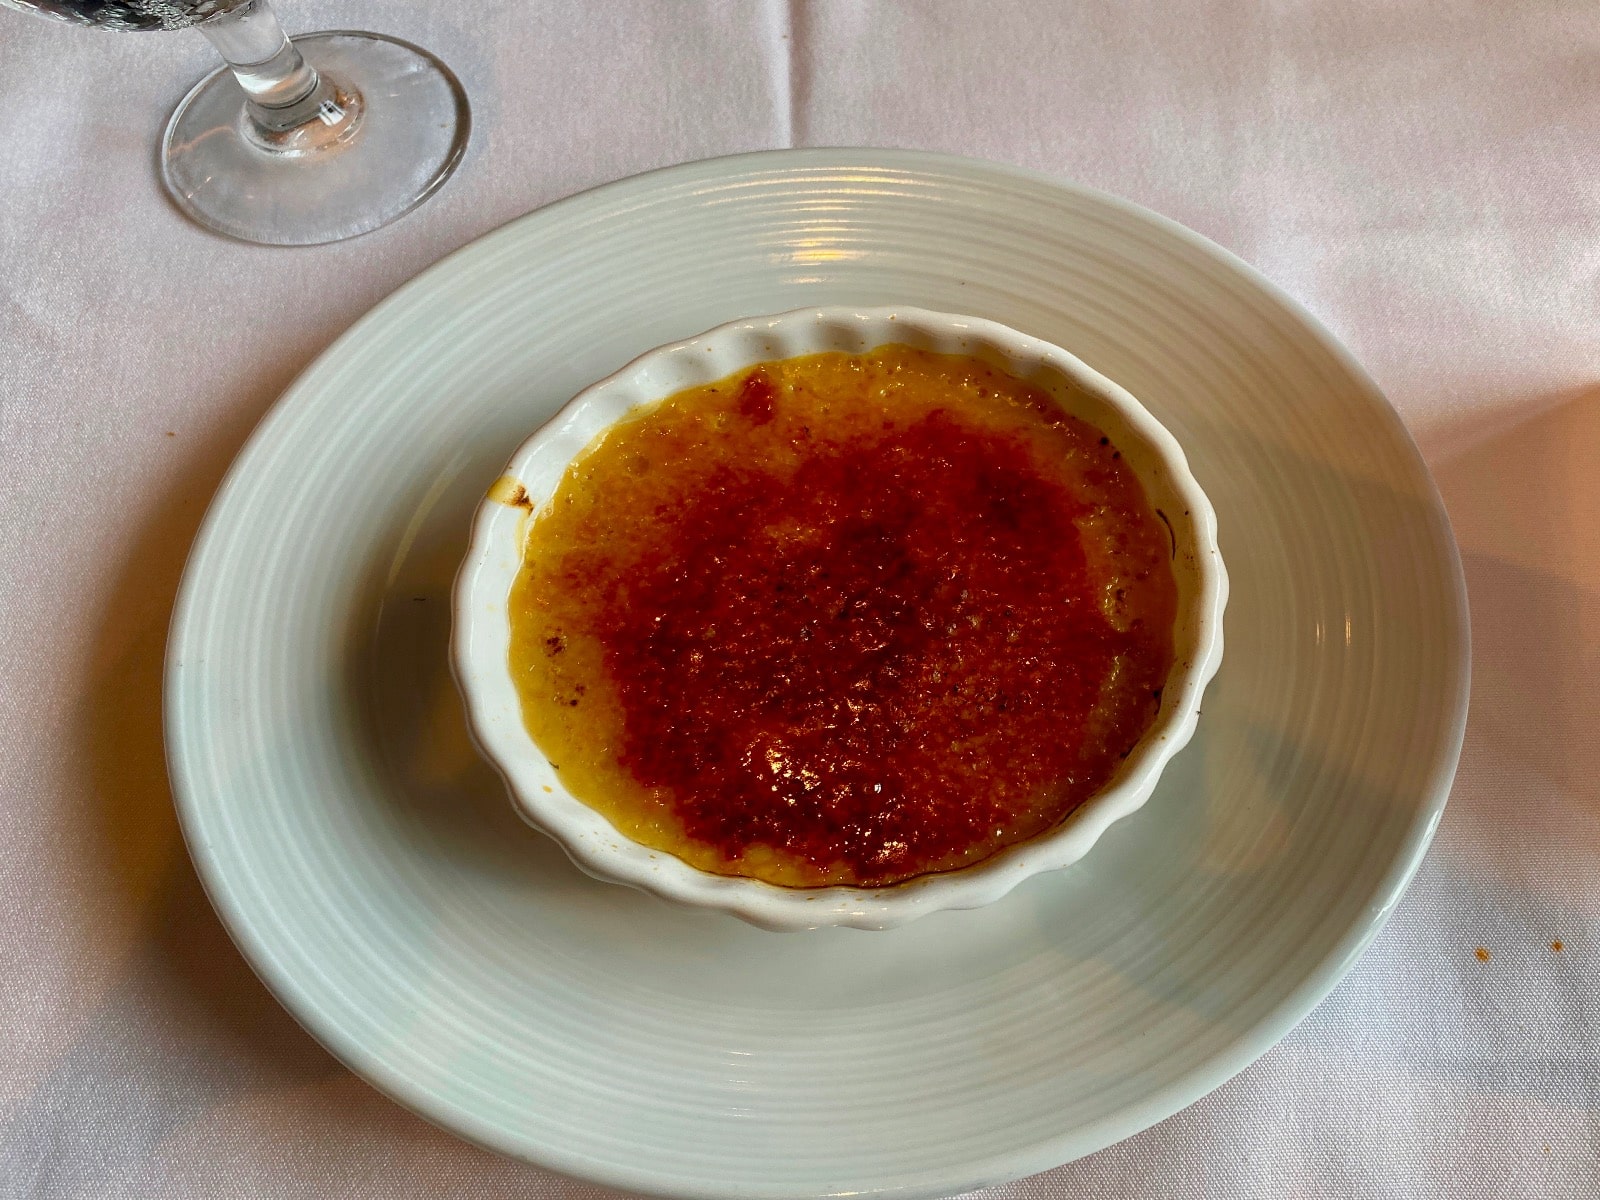 a bowl of creme brulee on a plate